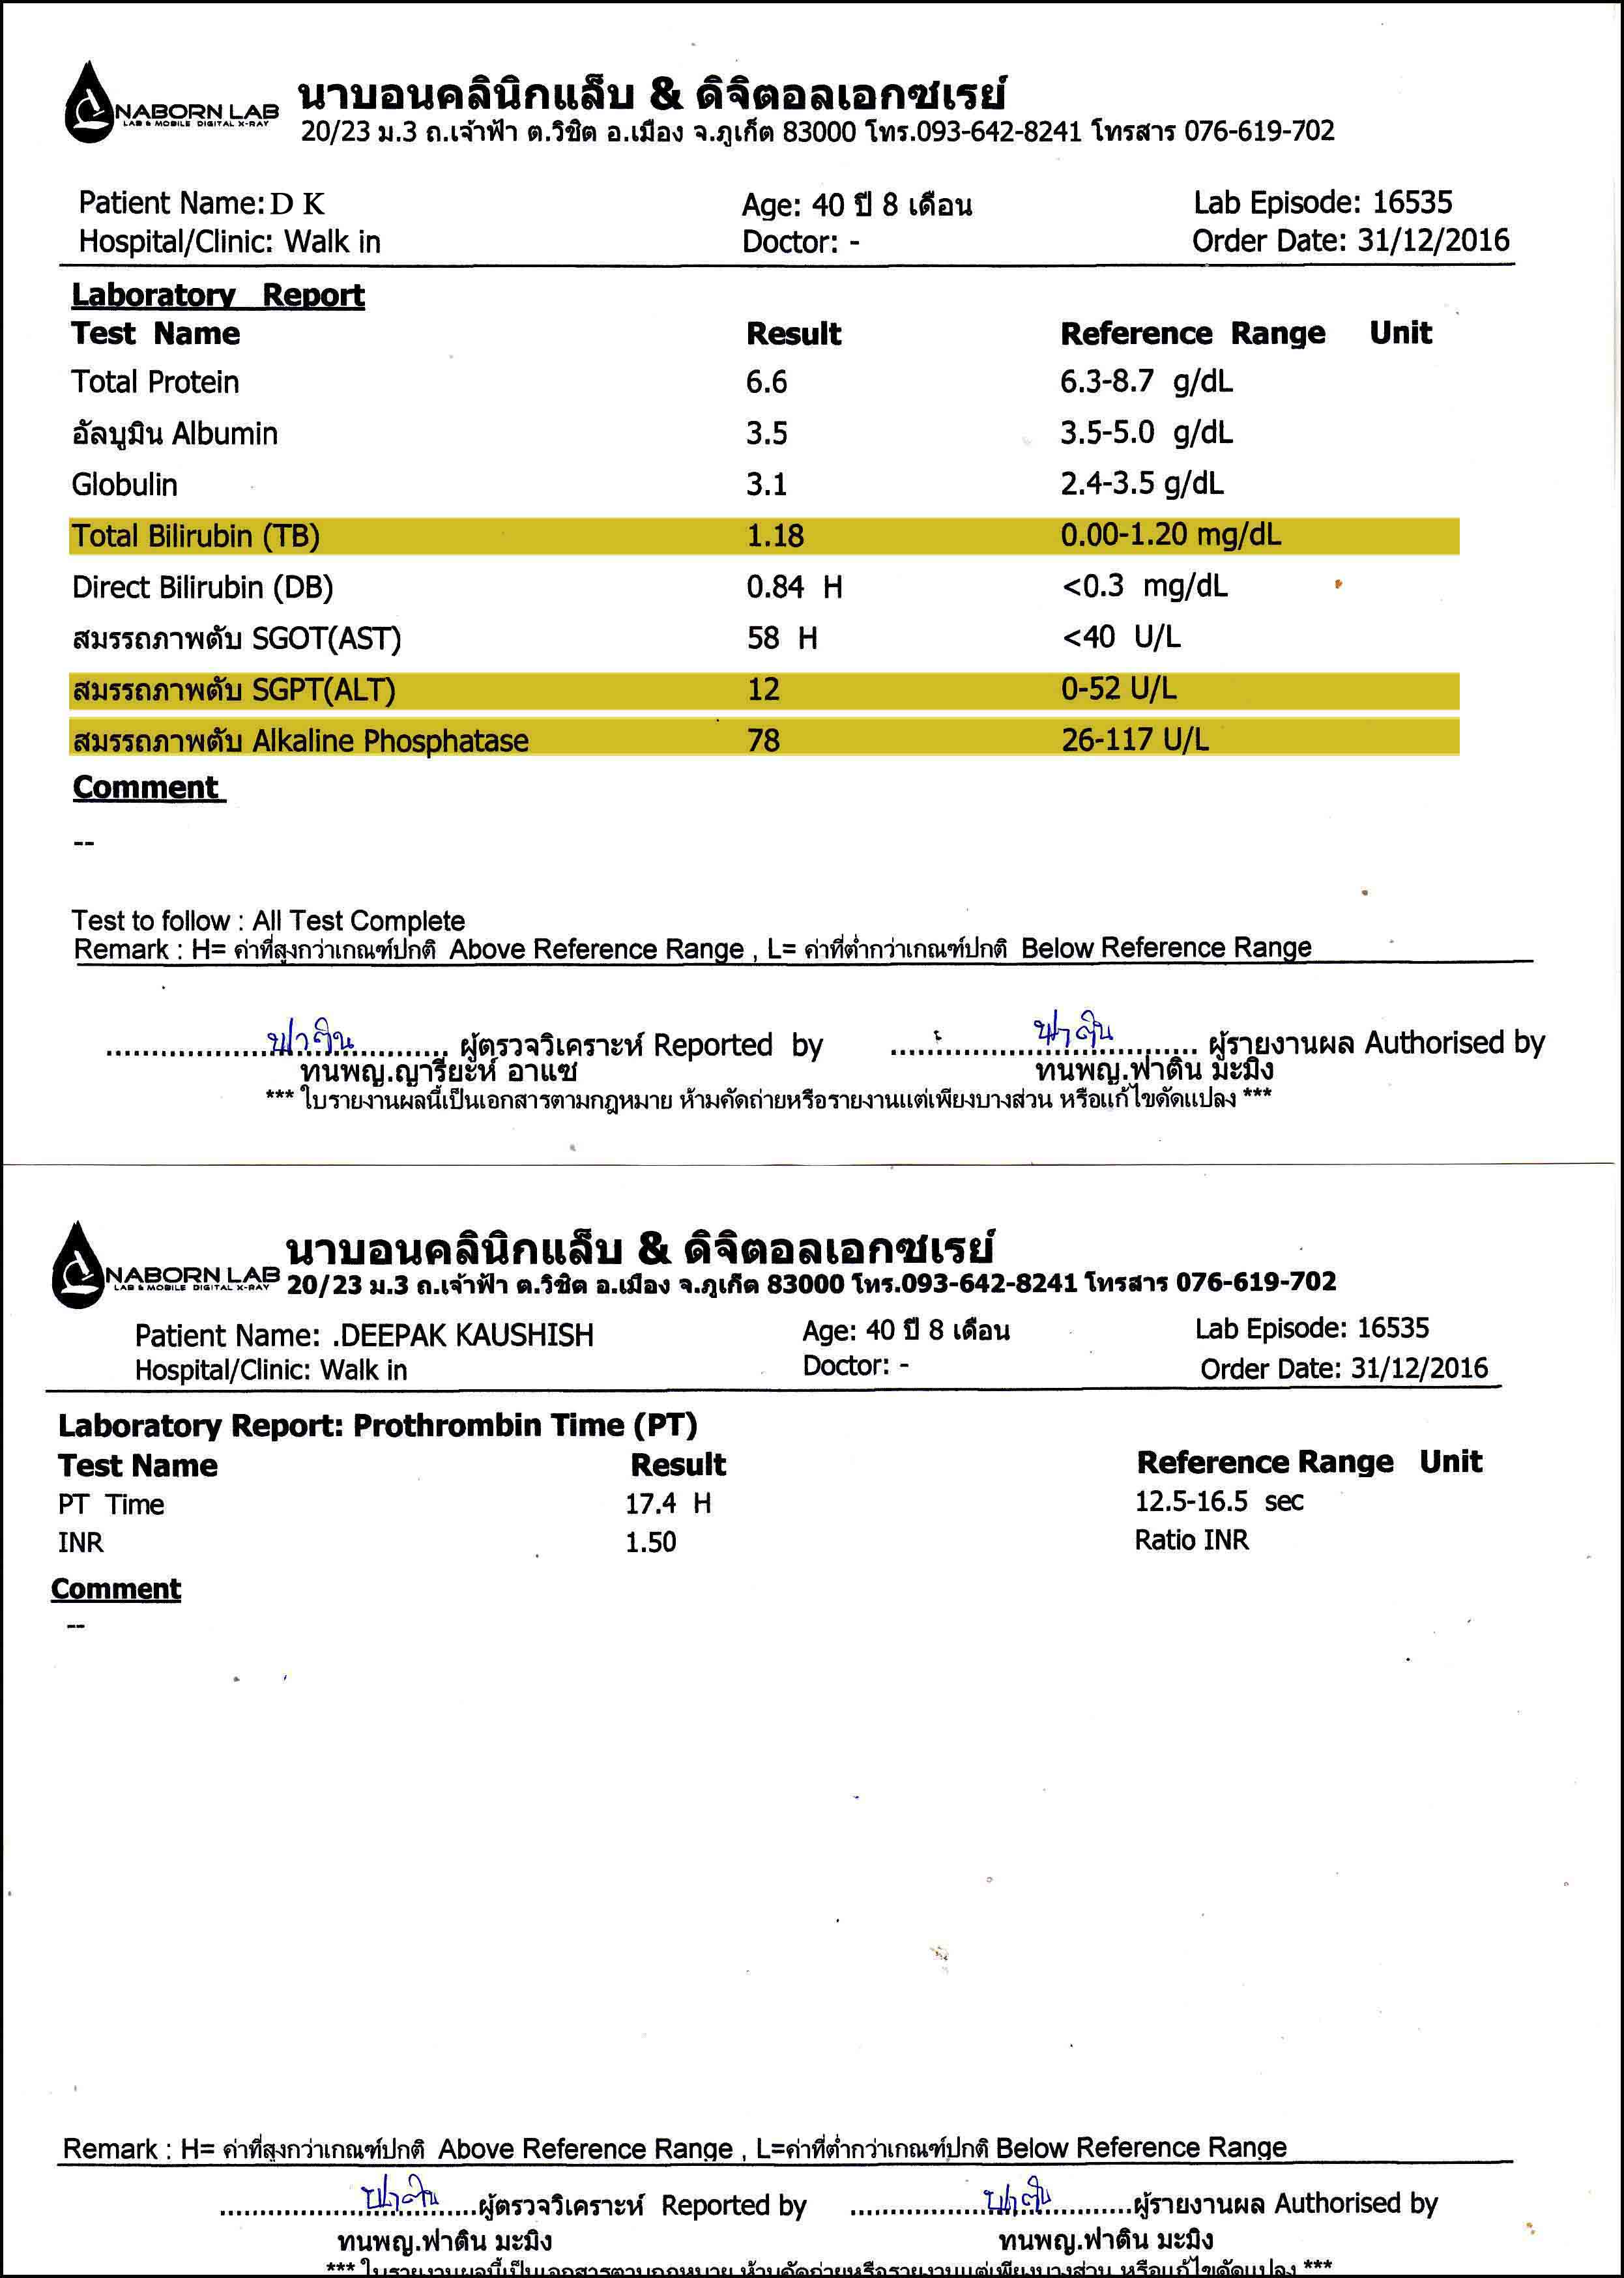 liver function test report